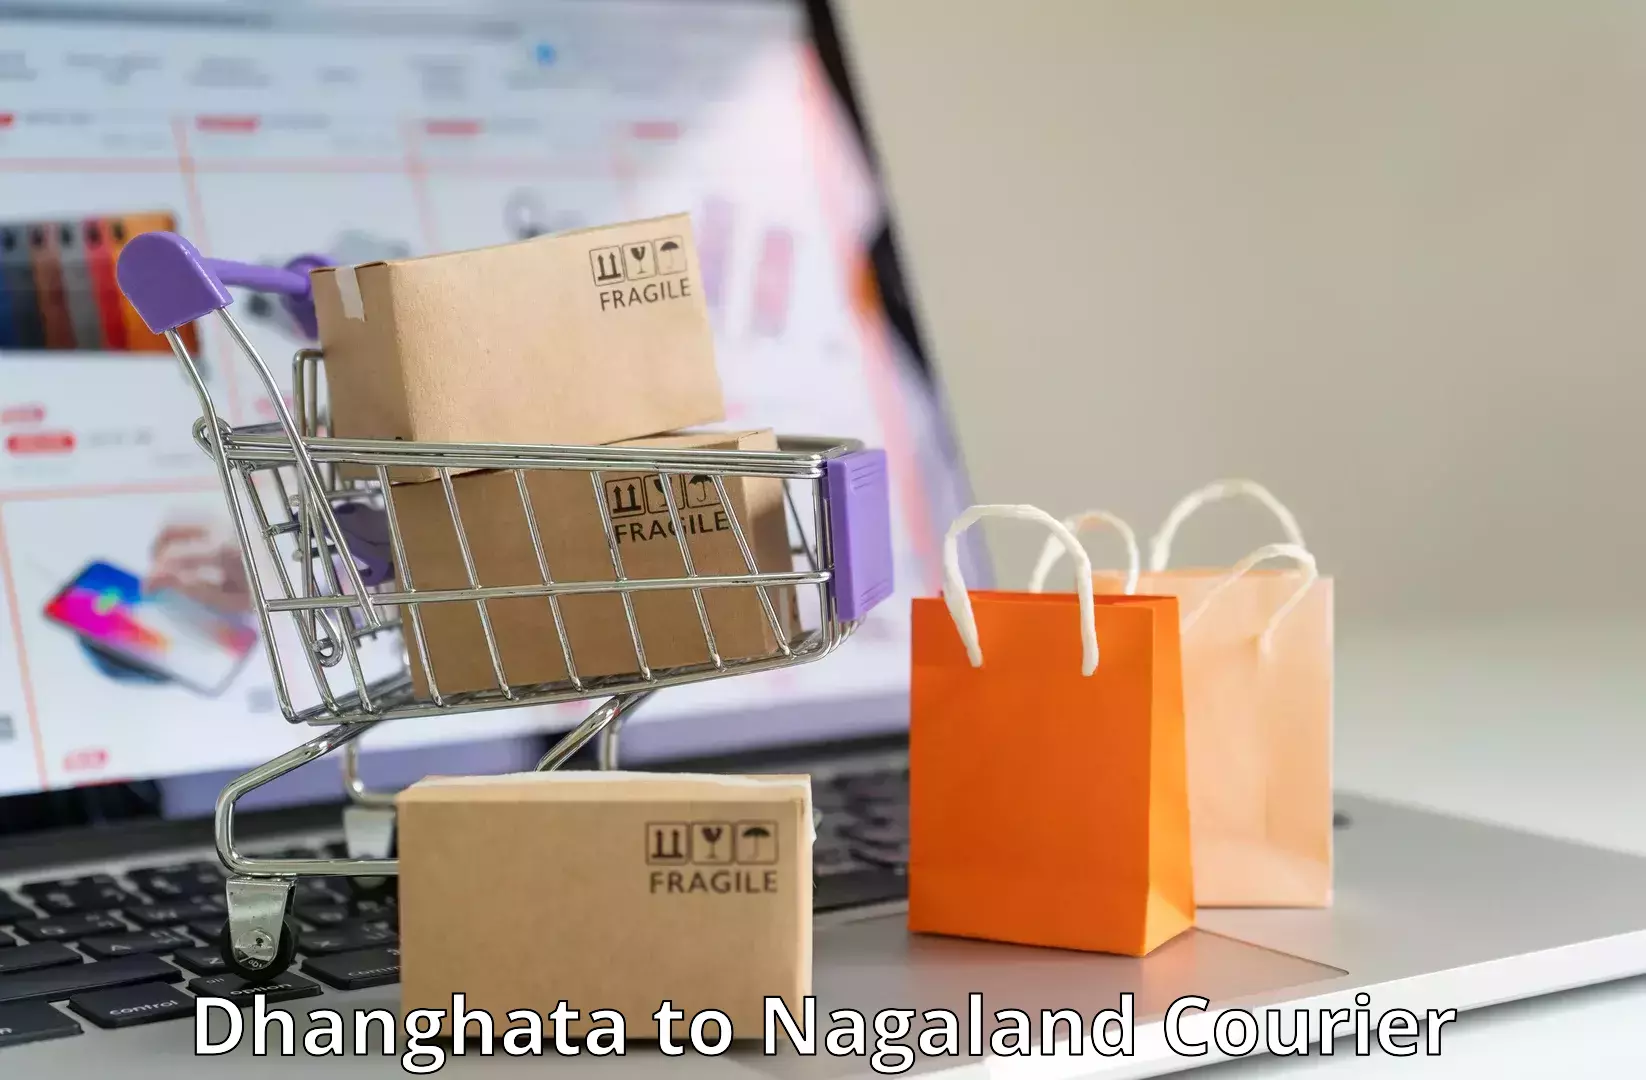 Same-day delivery solutions Dhanghata to Nagaland